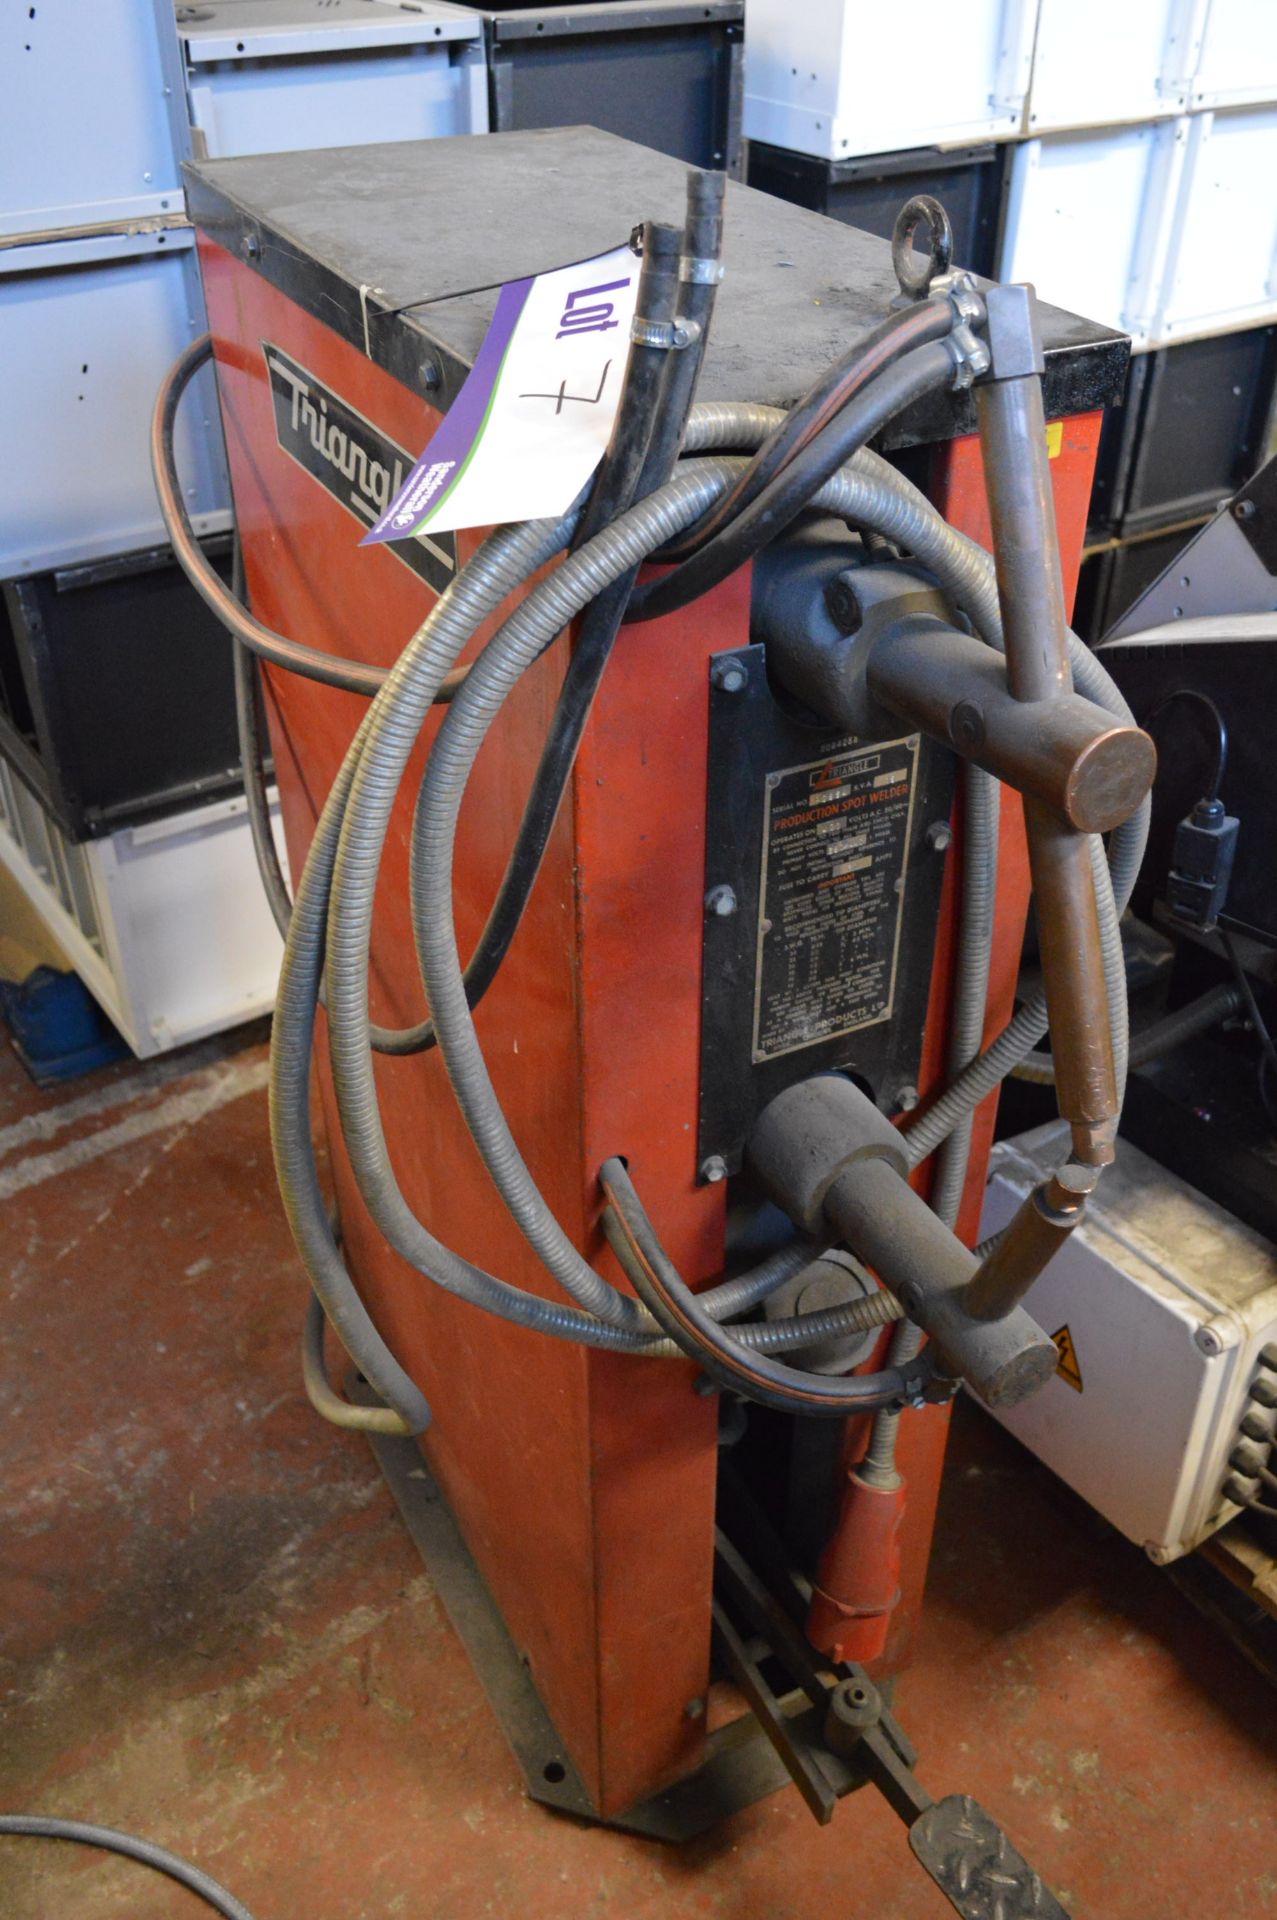 Triangle 15KWN PS852 Spot Welder, serial no. PS854